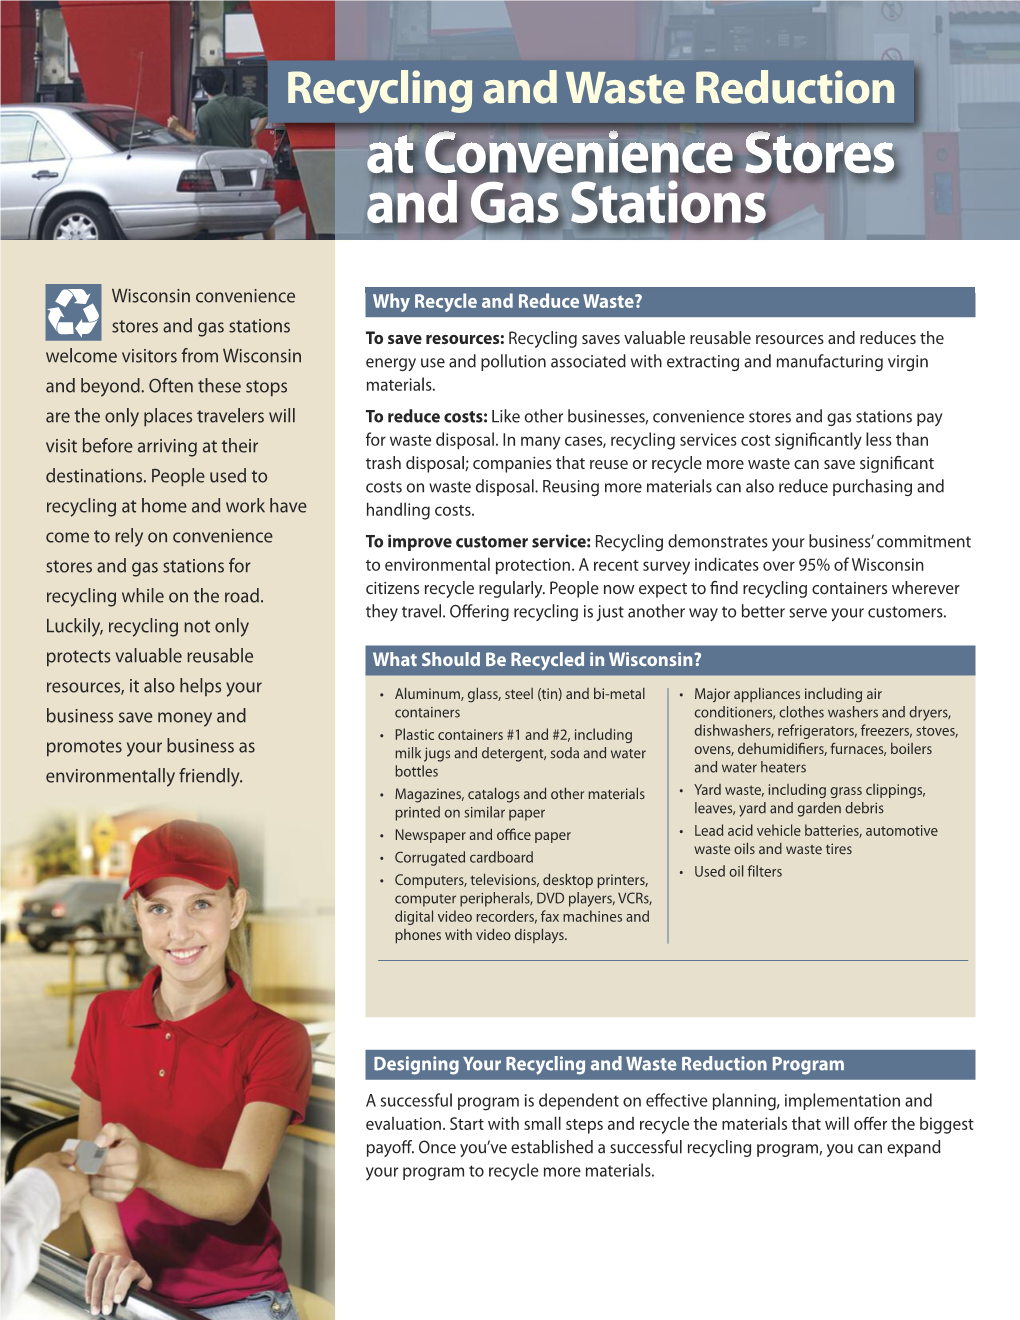 Recycling and Waste Reduction at Convenience Stores and Gas Stations